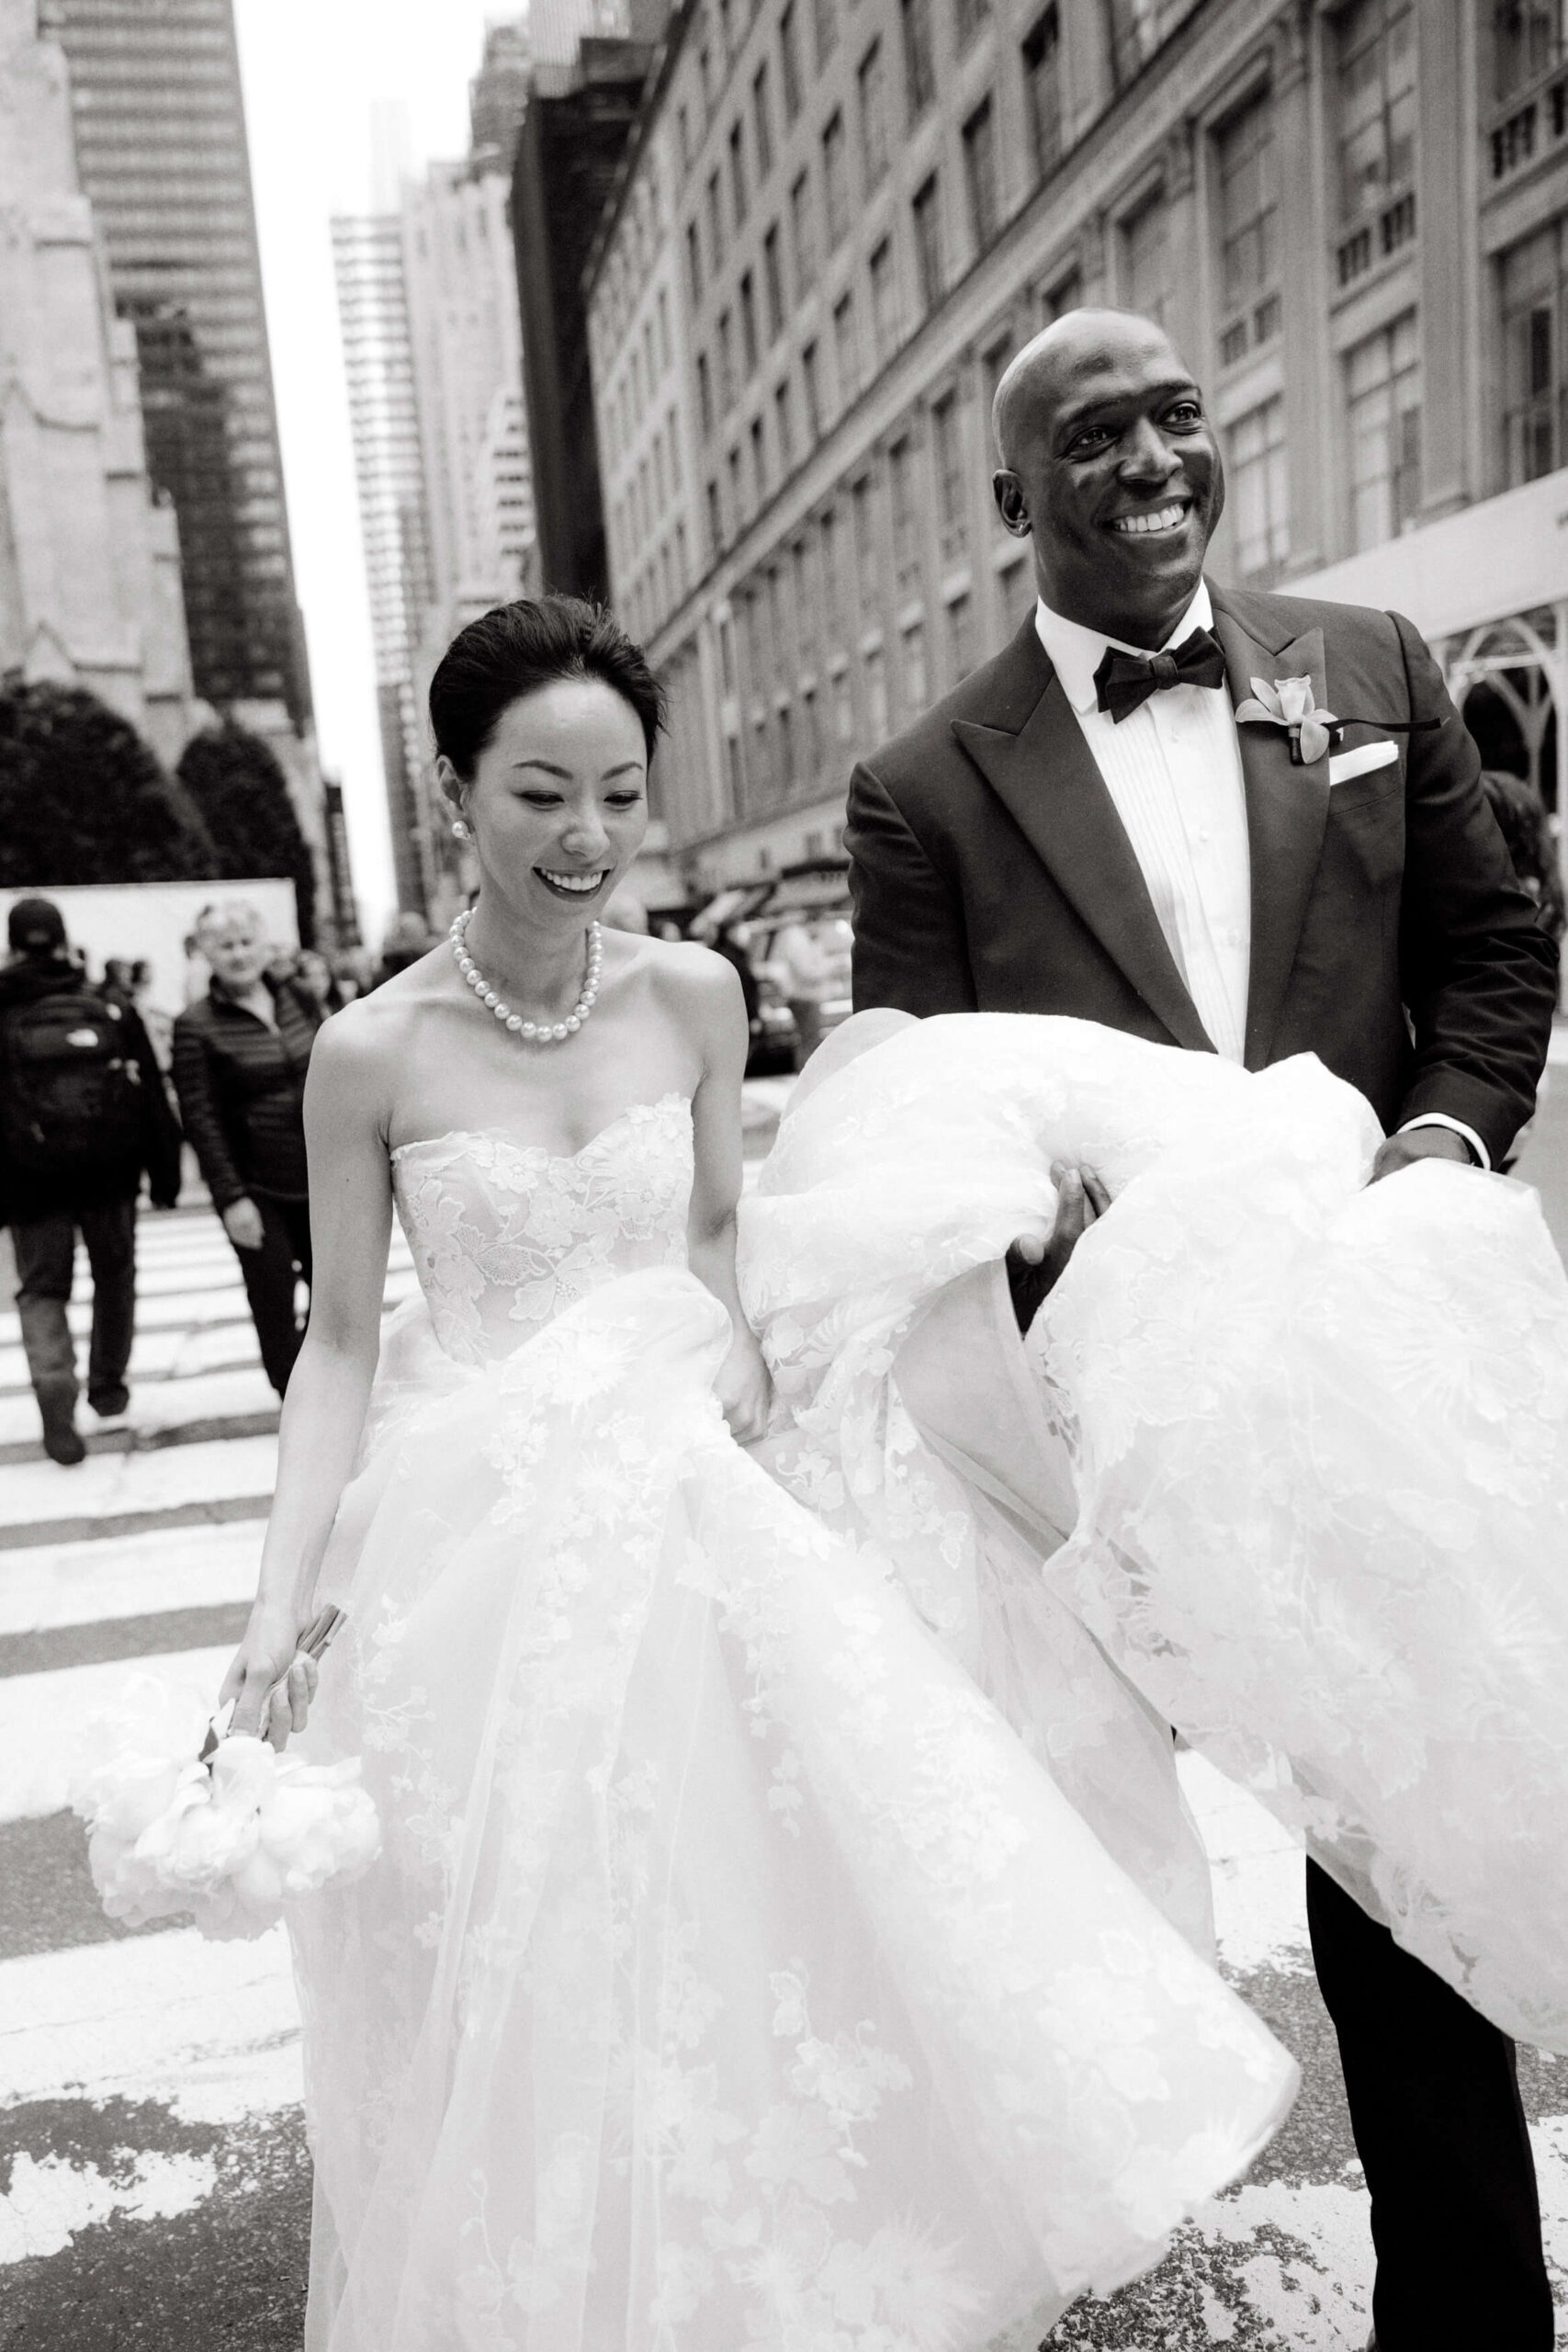 Black and white image of the bride and groom crossing the streets of NYC. Wedding photography styles image by Jenny Fu Studio